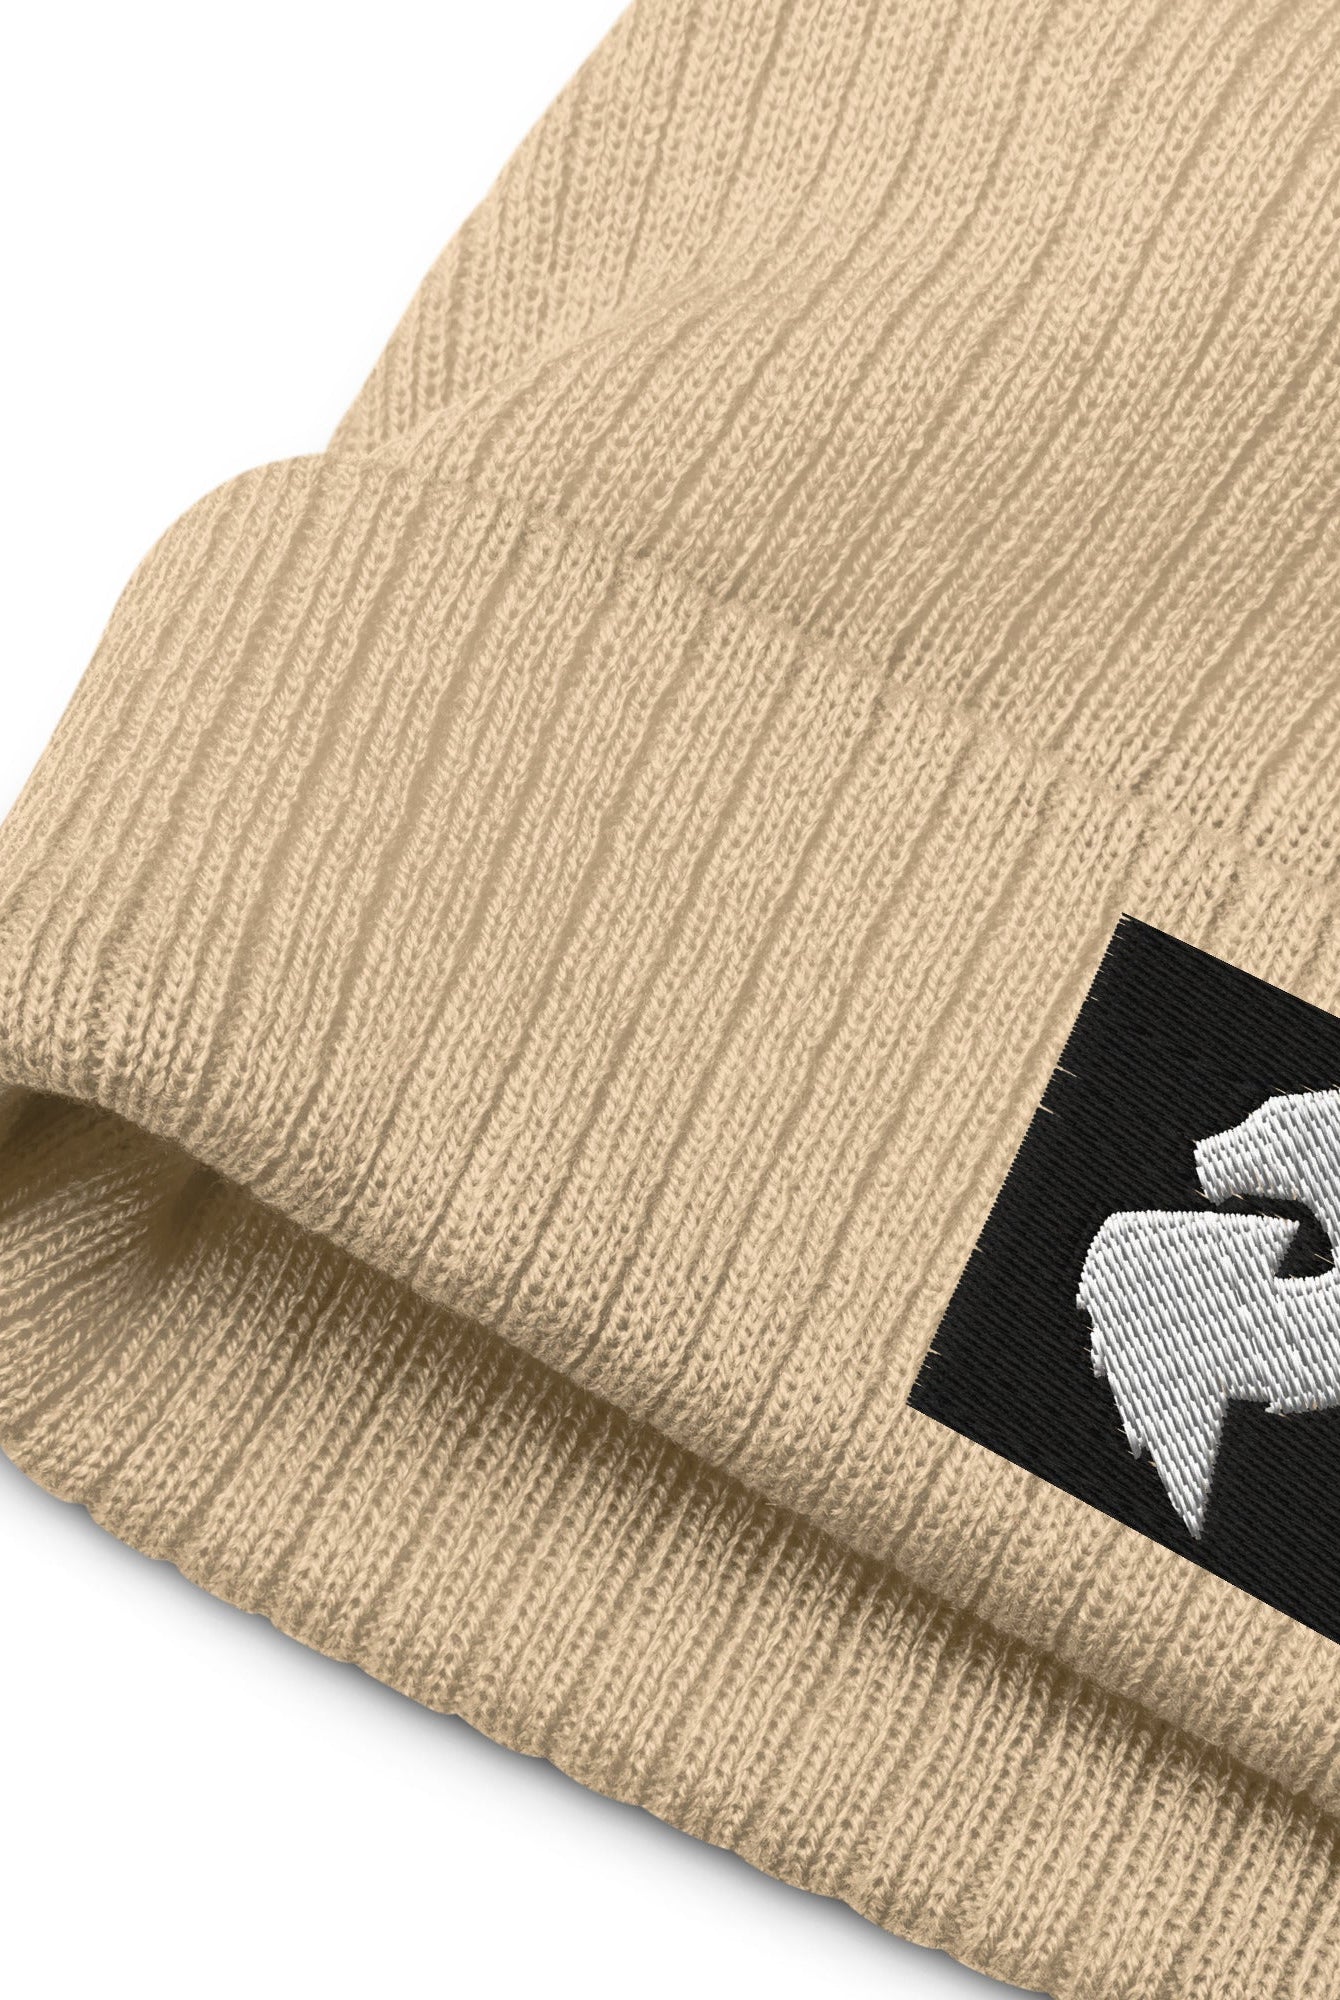 His or Hers Dragon Foxx™ Eco - Ribbed knit beanie - His or Hers Dragon Foxx™ Eco - Ribbed knit beanie - DRAGON FOXX™ - His or Hers Dragon Foxx™ Eco - Ribbed knit beanie - 2867494_15016 - Beige - - Accessories - Acid Green Eco - Ribbed knit beanie - Beanie